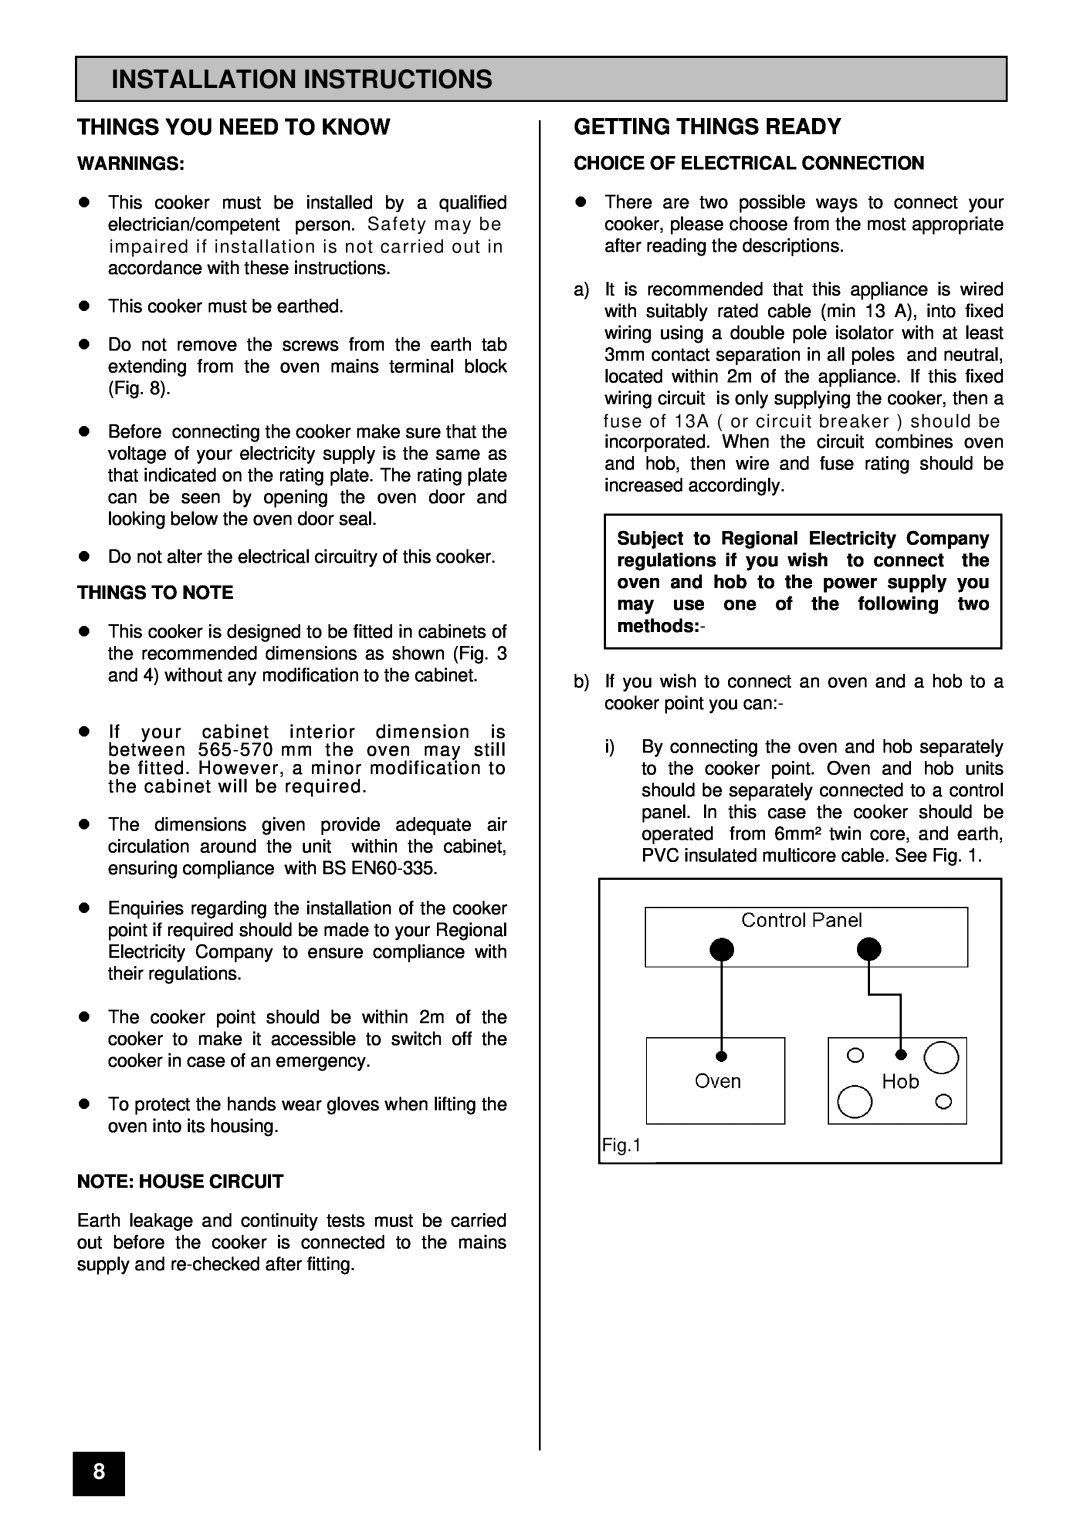 Tricity Bendix BS 613/2 Installation Instructions, Things You Need To Know, Getting Things Ready, Warnings, Things To Note 